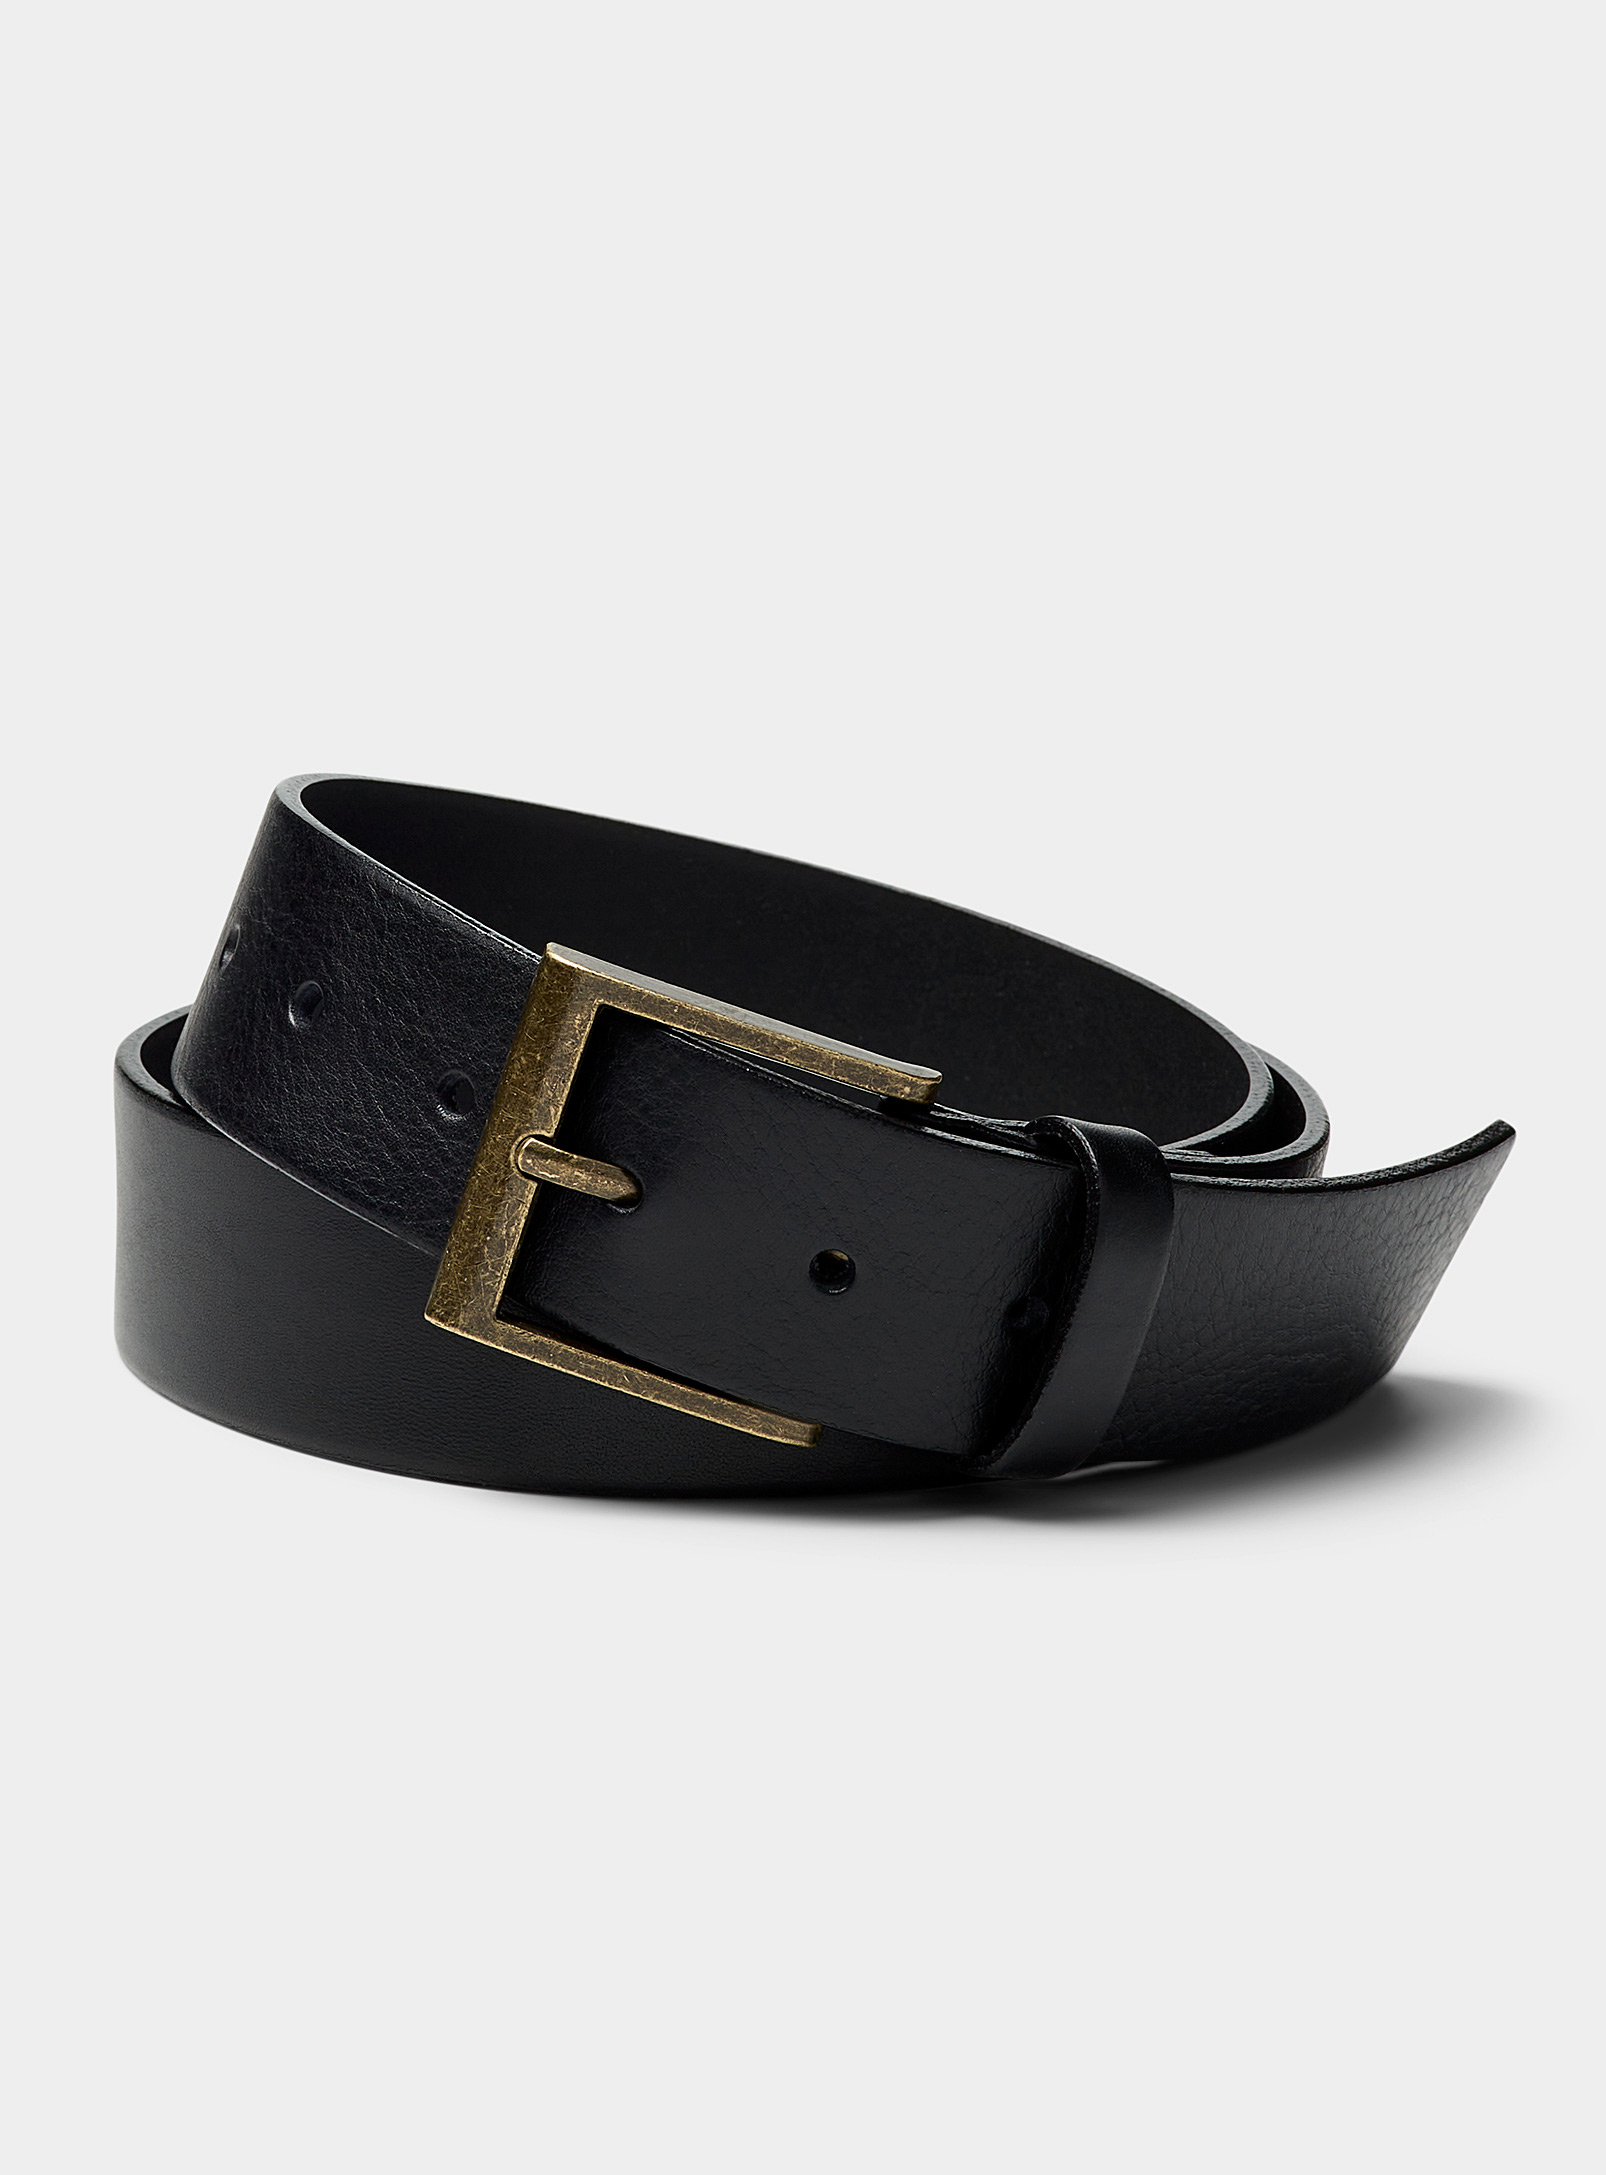 Le 31 Golden Buckle Brown Leather Belt Made In Canada In Black